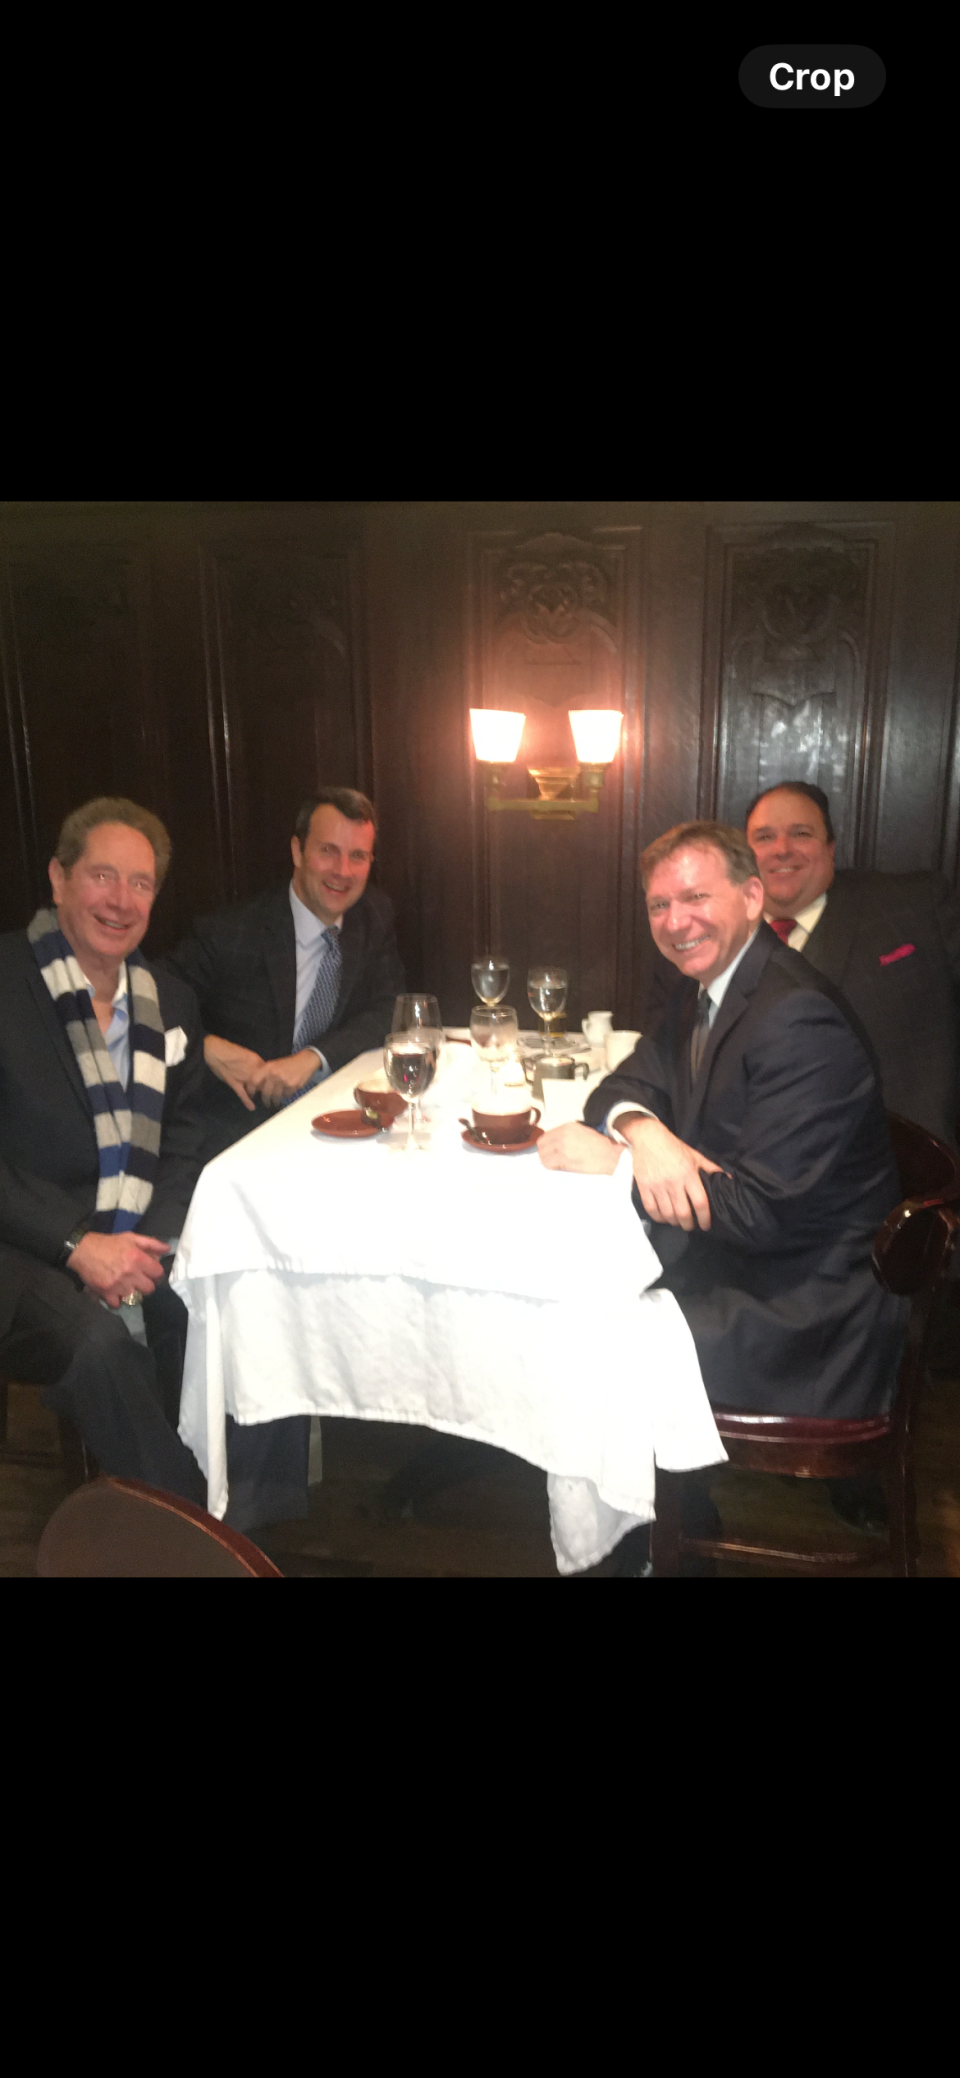 New York sports media members Anthony McCarron, Dom Amore and Pete Caldera out to dinner with Yankees broadcaster John Sterling at Keens Steakhouse in Manhattan.